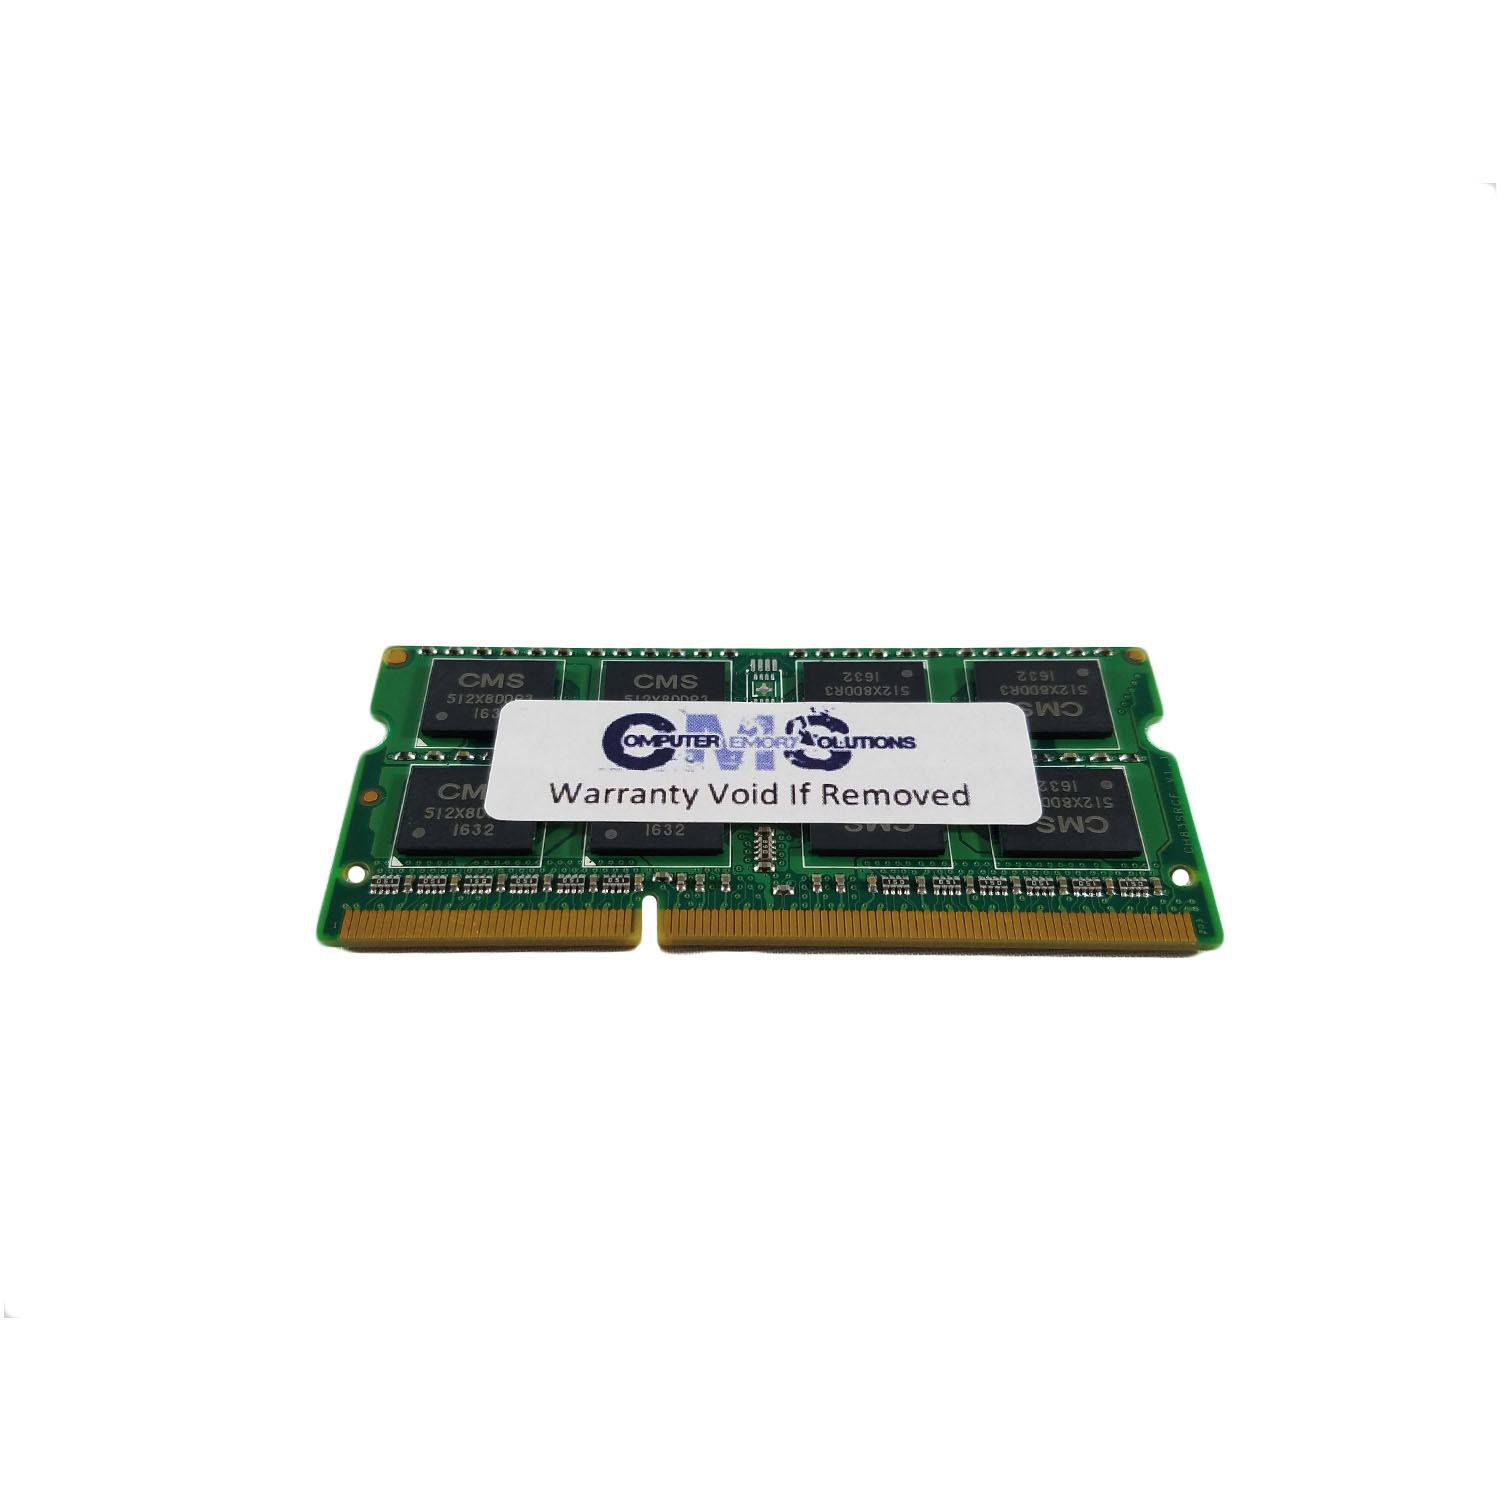 CMS 2GB (1X2GB) DDR3 8500 1066MHZ NON ECC SODIMM Memory Ram Upgrade Compatible with Toshiba® Mini Notebook Nb520 Series (Ddr3) - B123 - image 2 of 3